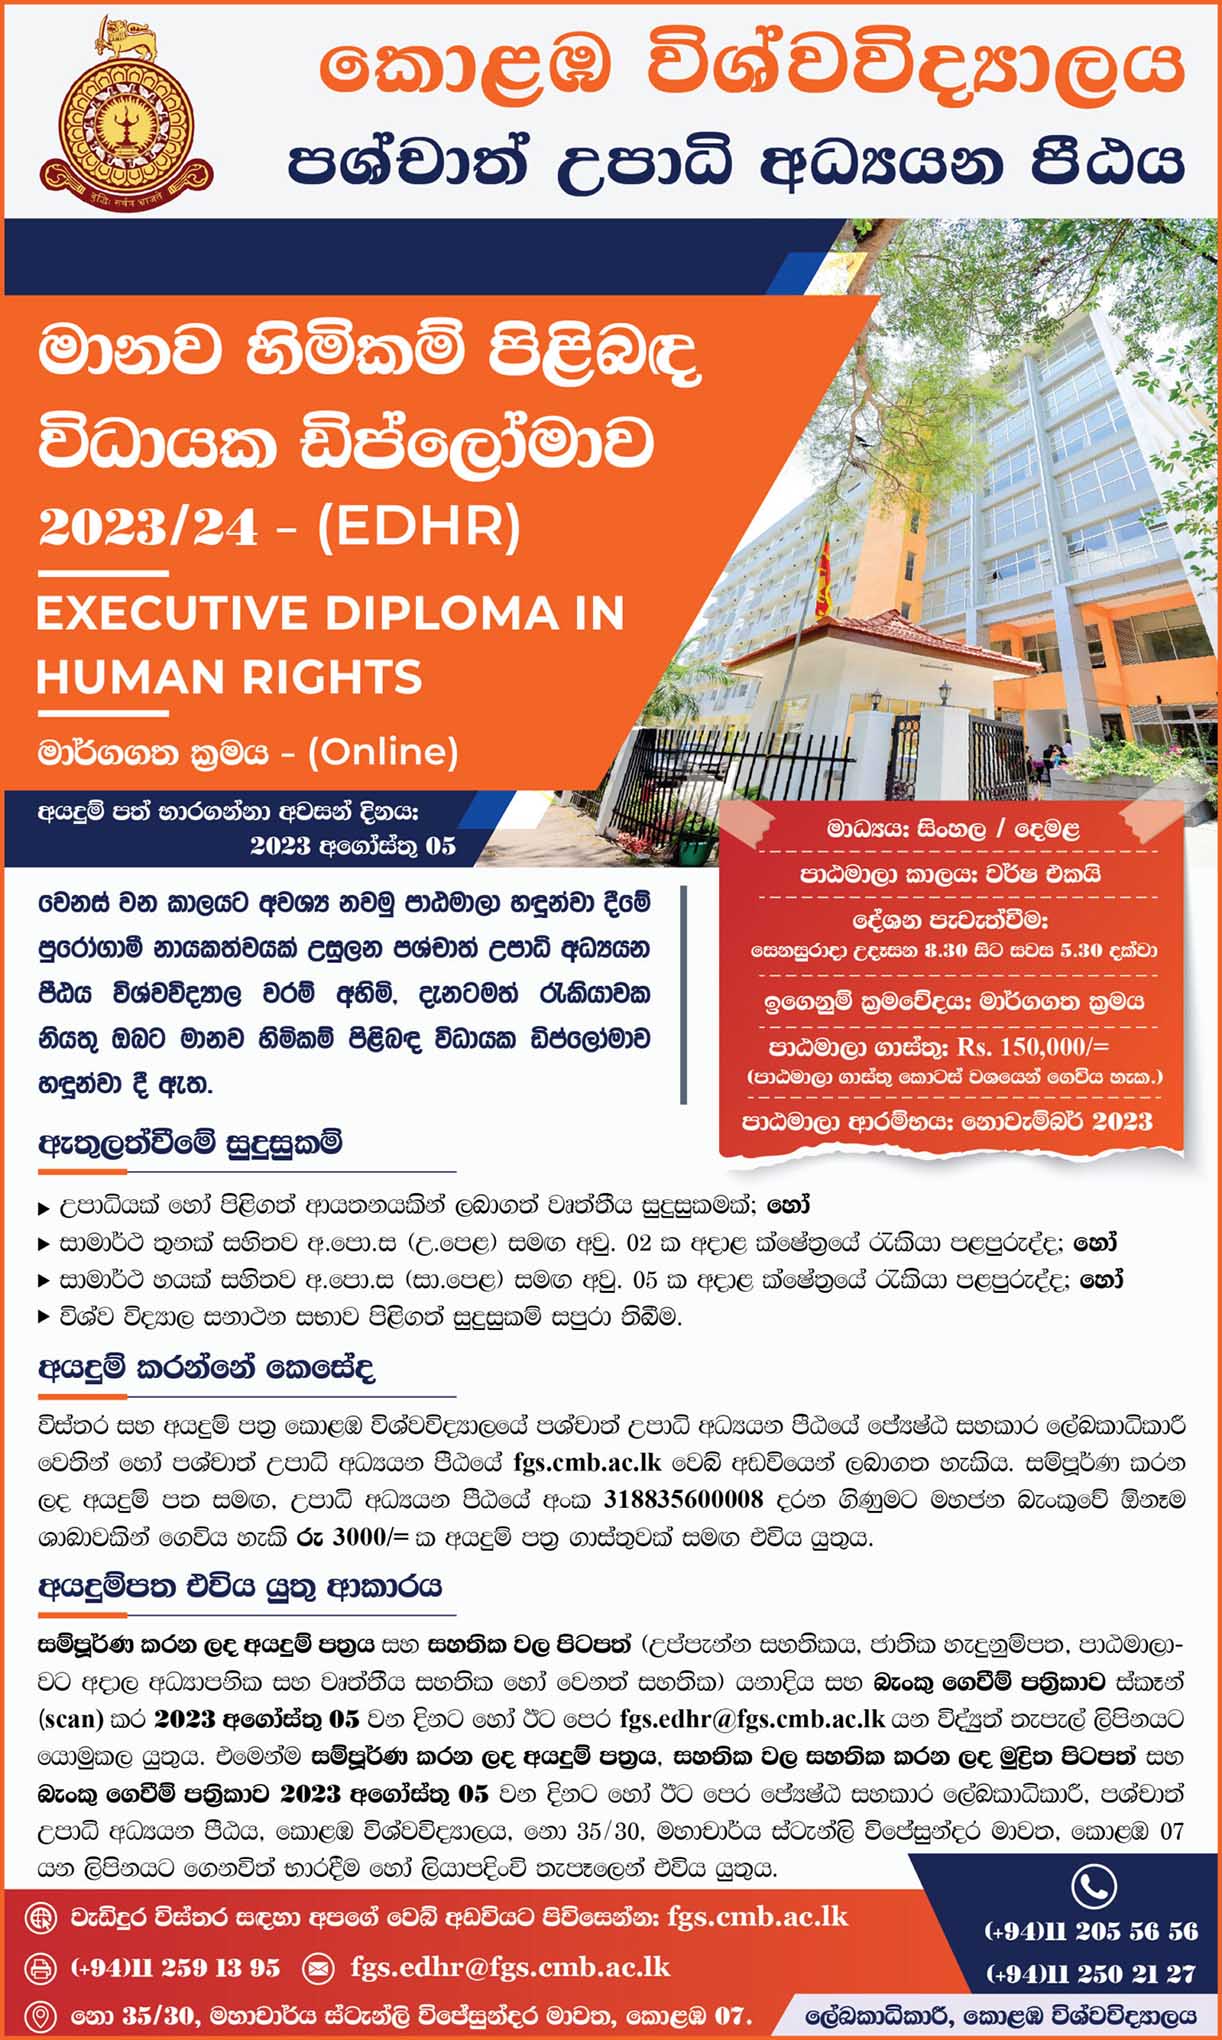 Executive Diploma in Human Rights (EDHR) 2023/24 - University of Colombo